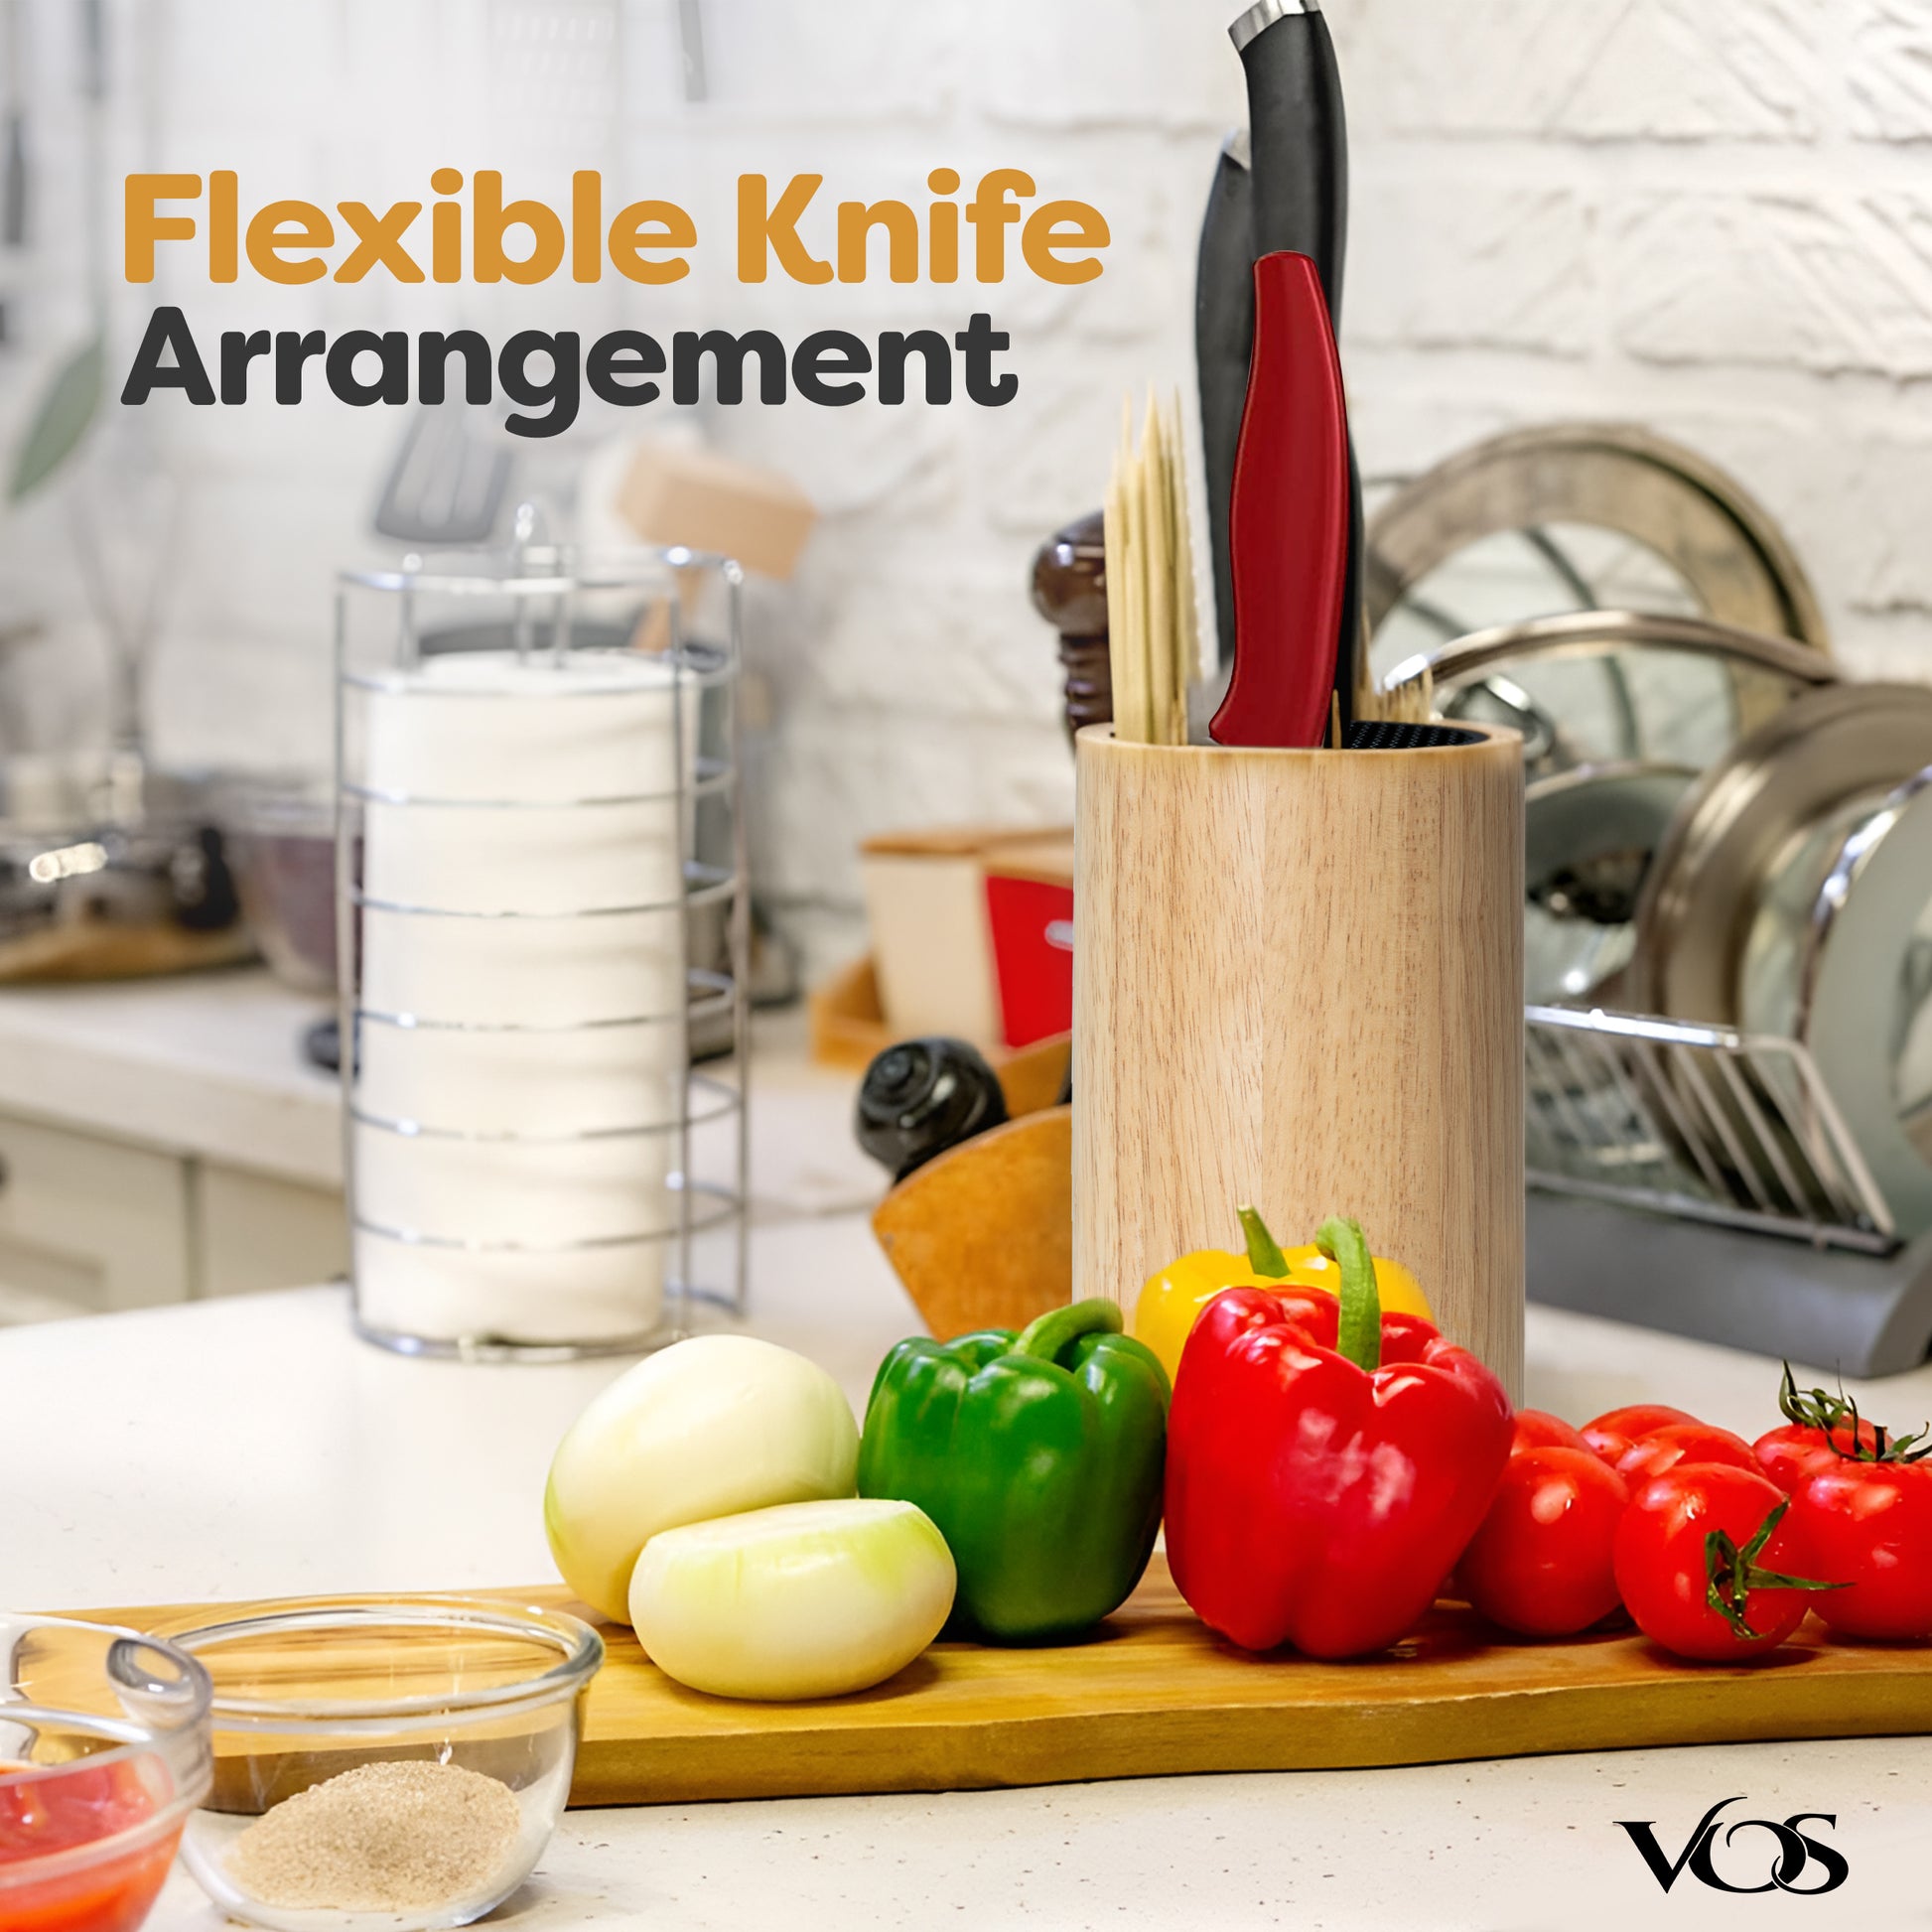 KeepingcooX Universal Knife Block Holder with Premium Nylon Insert -  Cooking Utensils Holder, Perfect for Ceramic Knives, Steak Knives and  Kitchen